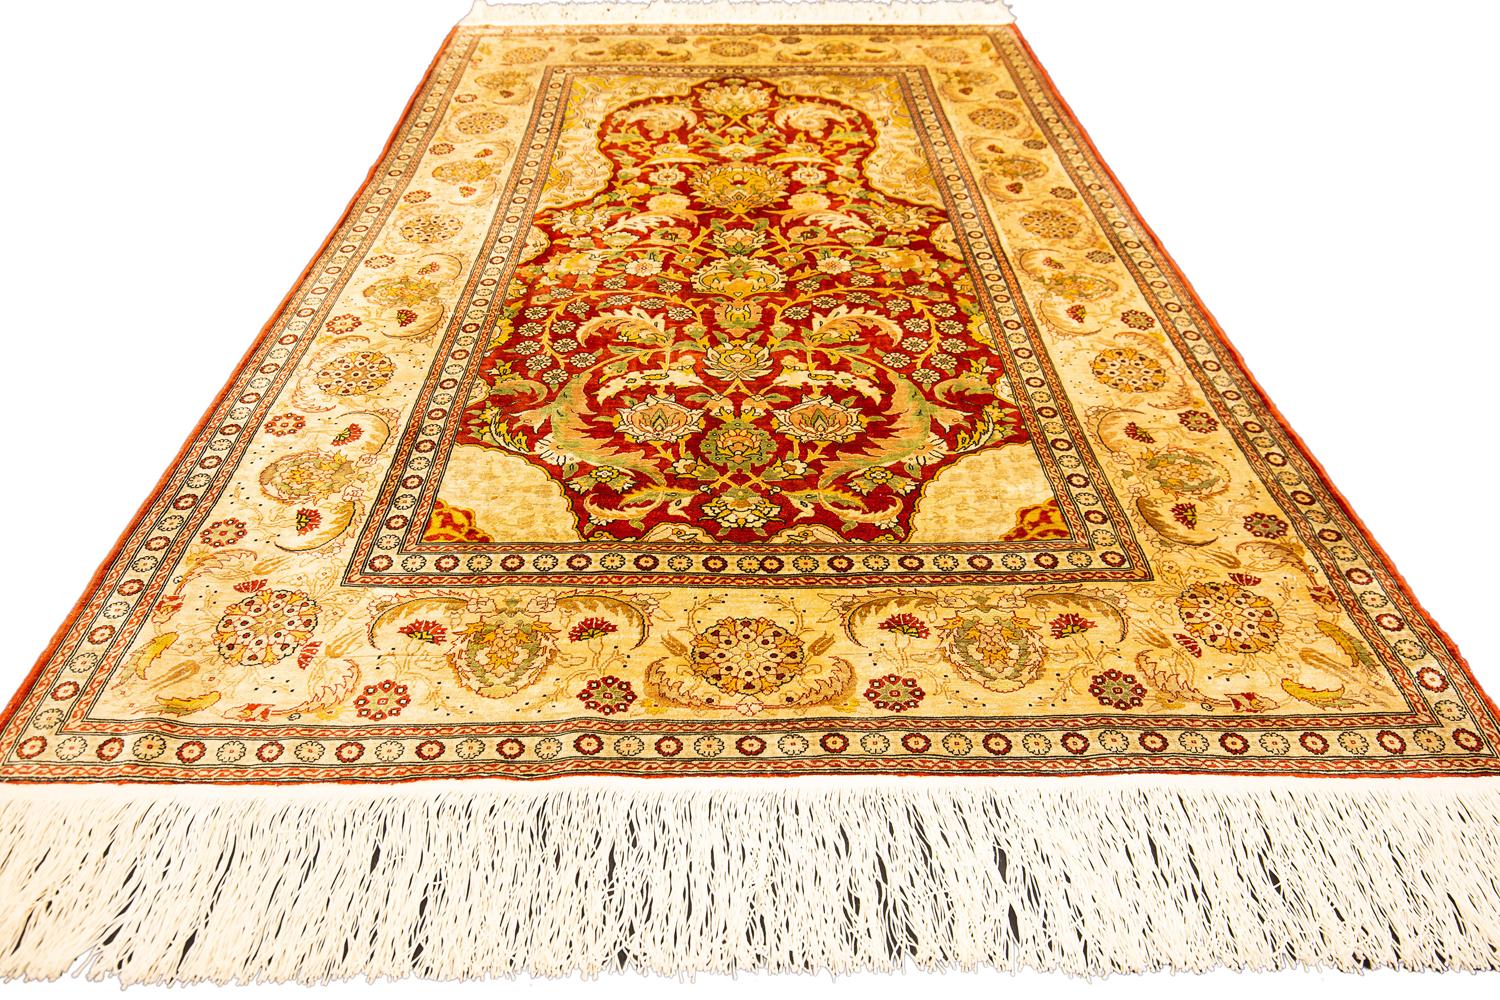 This is an extremely fine silk and metal threaded Turkish Herekeh rug woven circa 1950 - 1970s and measures 156 - 100CM in size. In the top left corner of this piece is located the iconic Herekeh signature representing the authenticity and quality